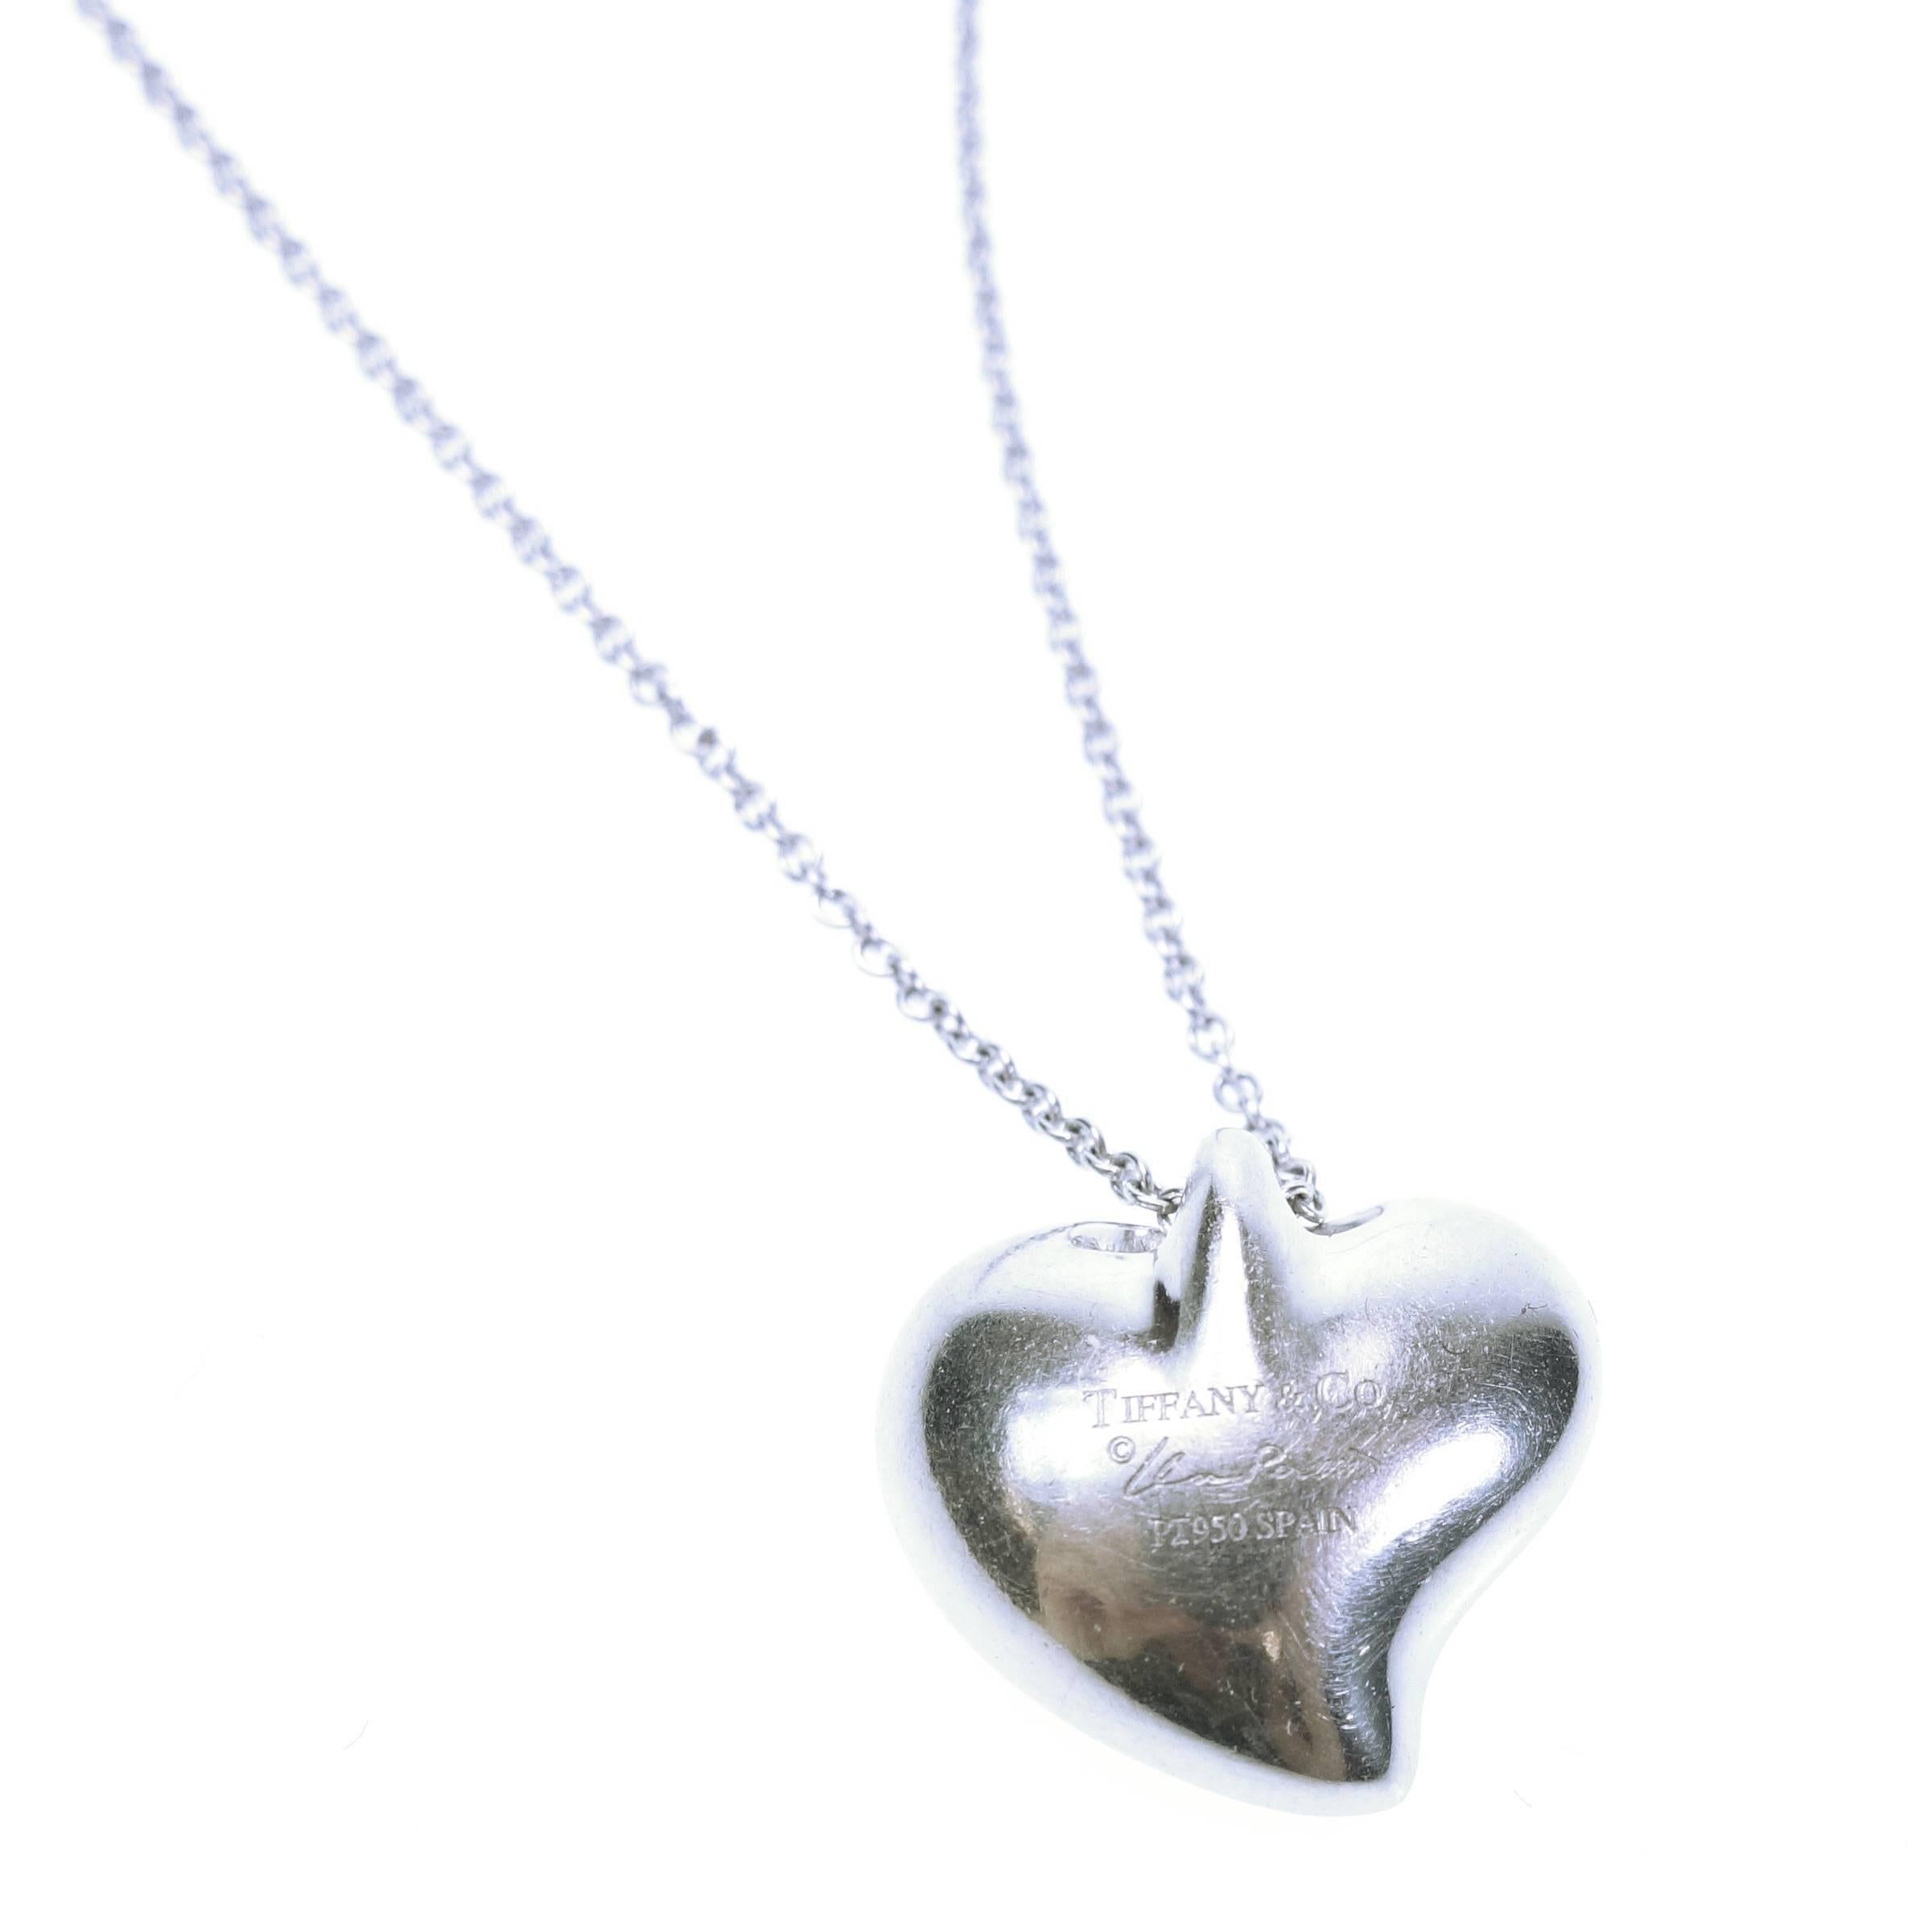 Rare Tiffany & Co. by Elsa Peretti pave' set diamond heart pendant and Platinum chain. 
Marked: TIFFANY&Co. Elsa Peretti PT950 SPAIN
Dimensions of the heart: 14 mm X 13.5 mm, depth: 6 mm. 
Total diamond weight: approx. 0.35ct.
Length: 15